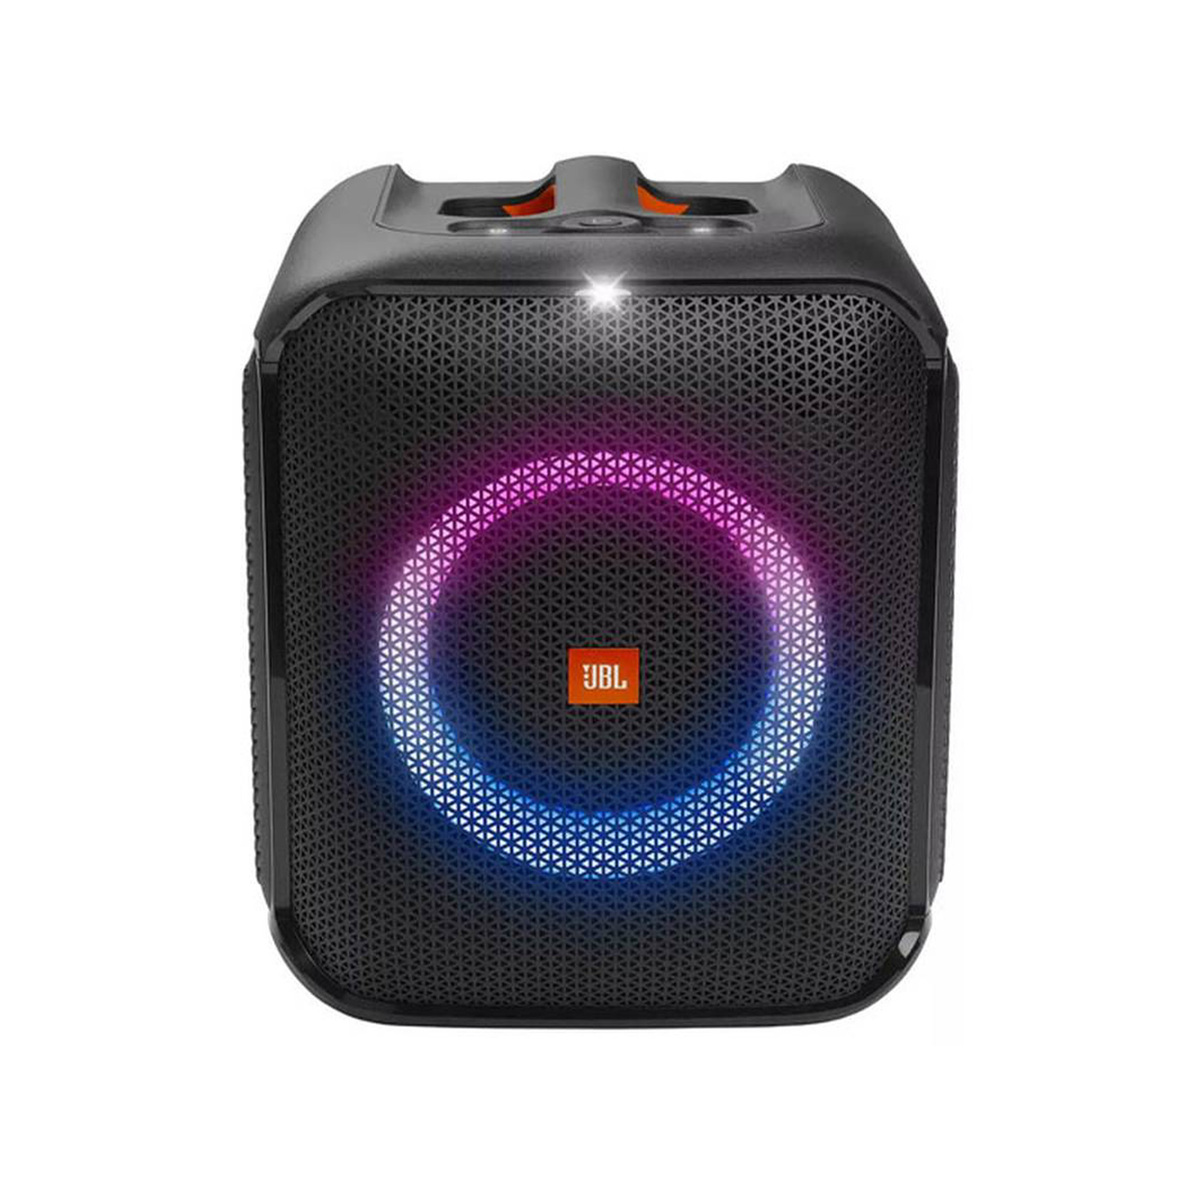 JBL PARTYBOXENCORE ESSENTIAL Portable party speaker with powerful 100W sound, built-in dynamic light show, and splash proof design.